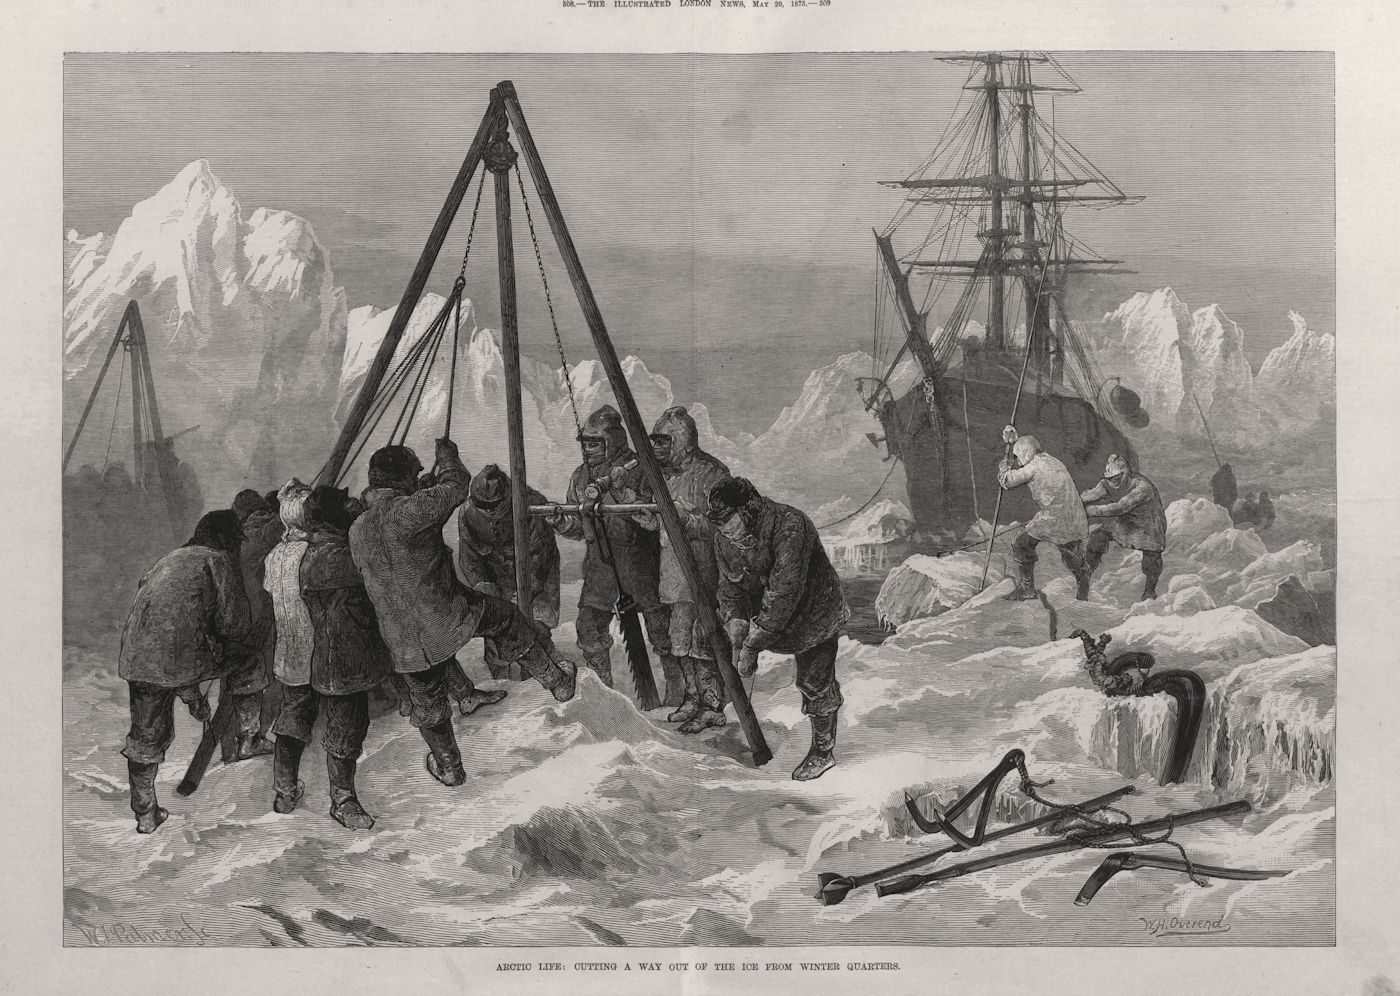 Arctic life: cutting a way out of the ice from winter quarters. Explorers 1875